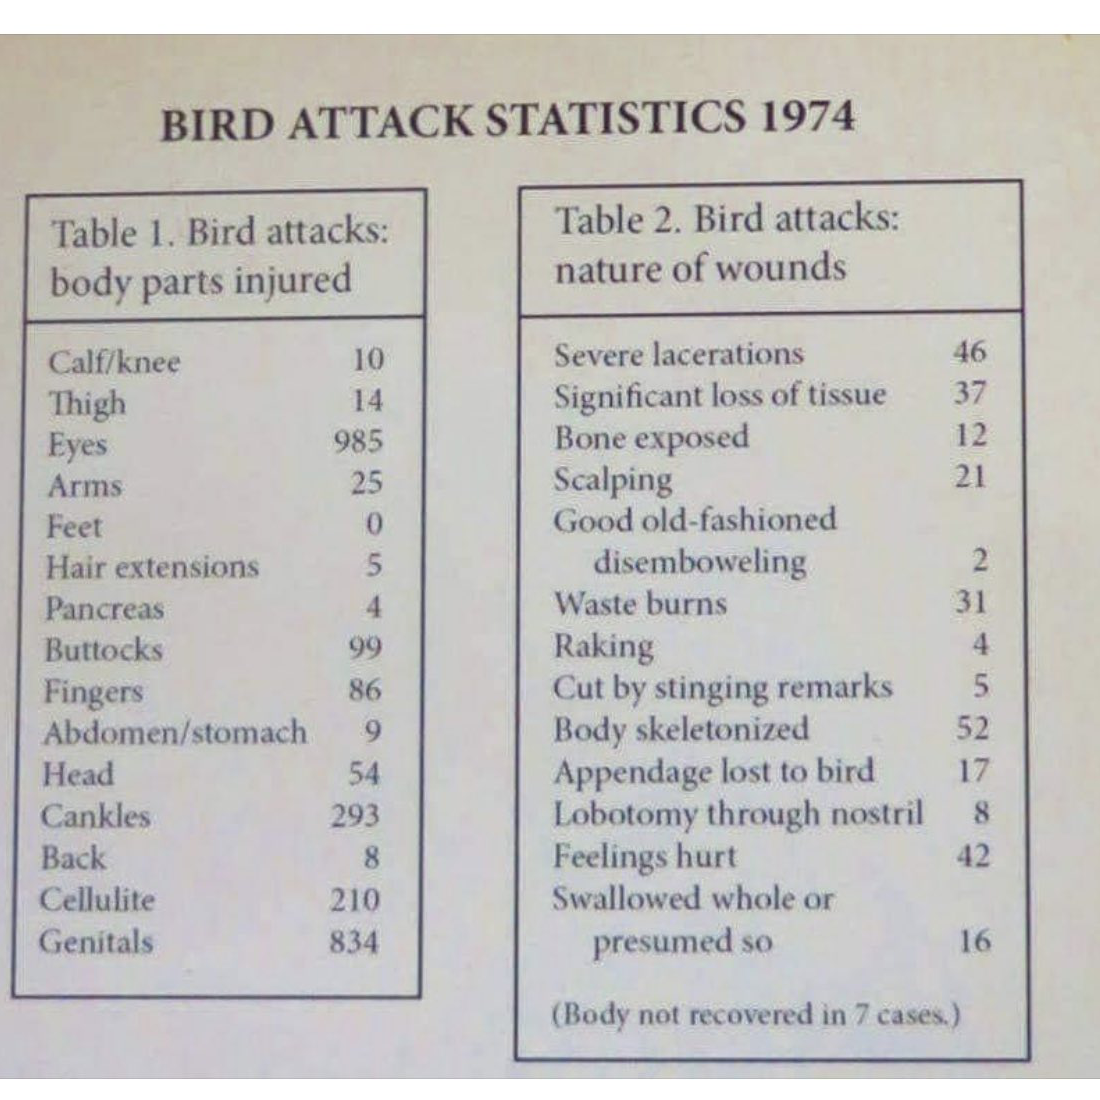 Cropped version of the bird attacks image, now containing only the tables and title.